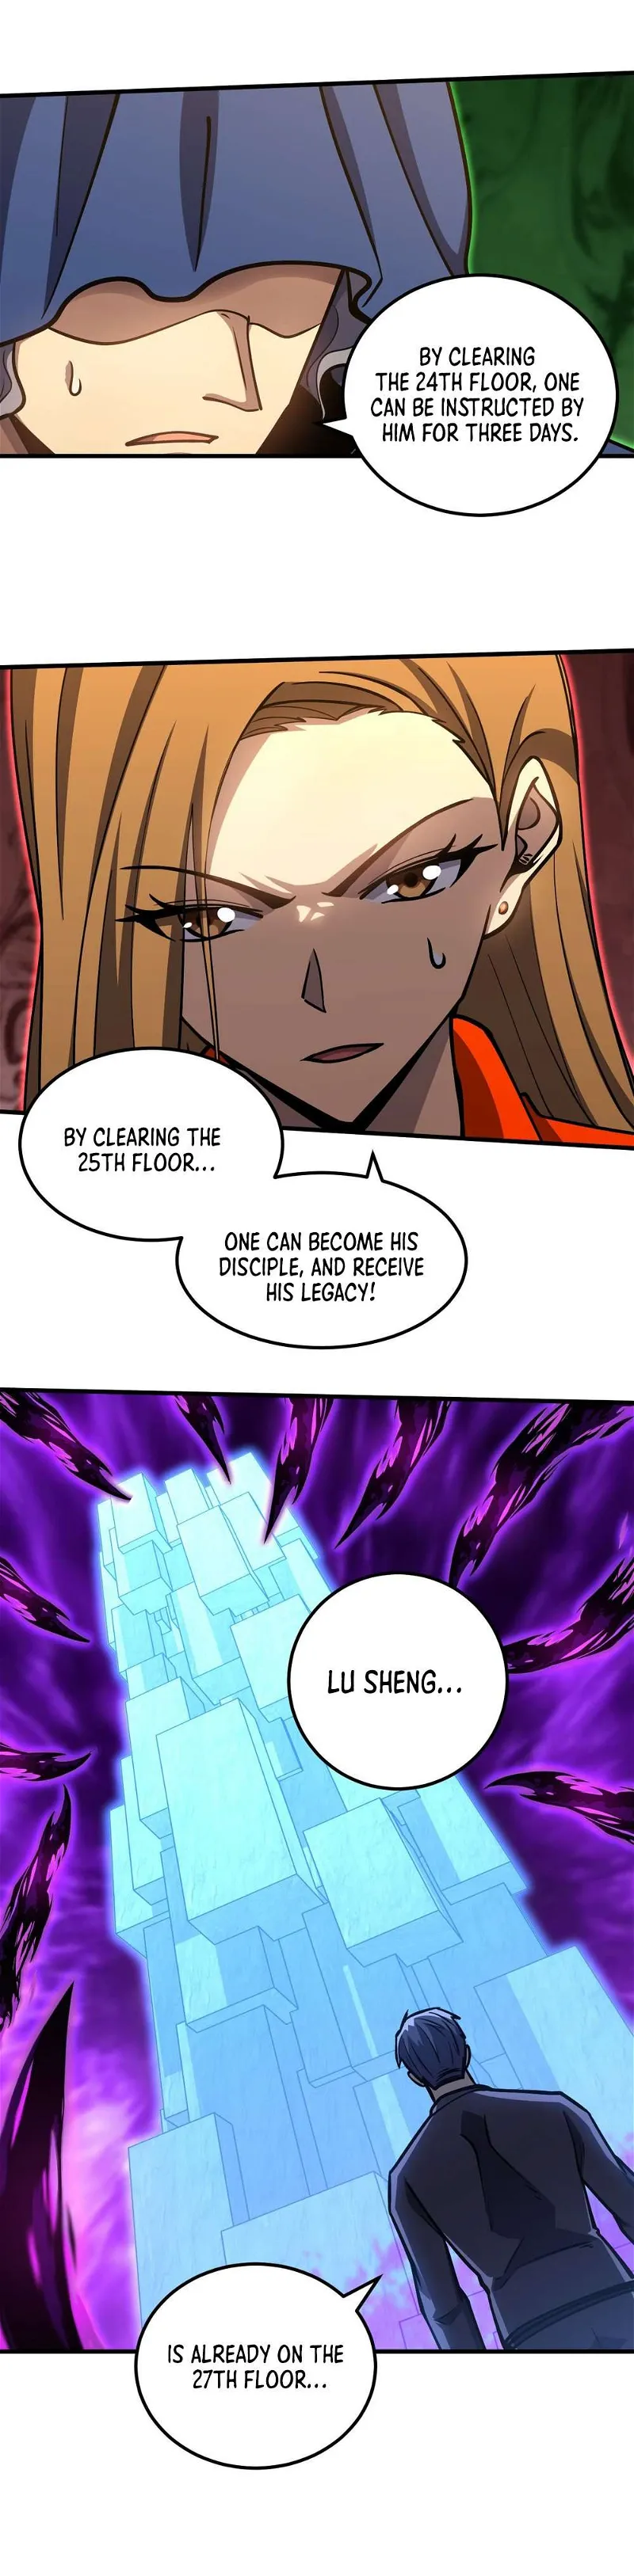 Logging 10,000 Years into the Future Chapter 85 page 4